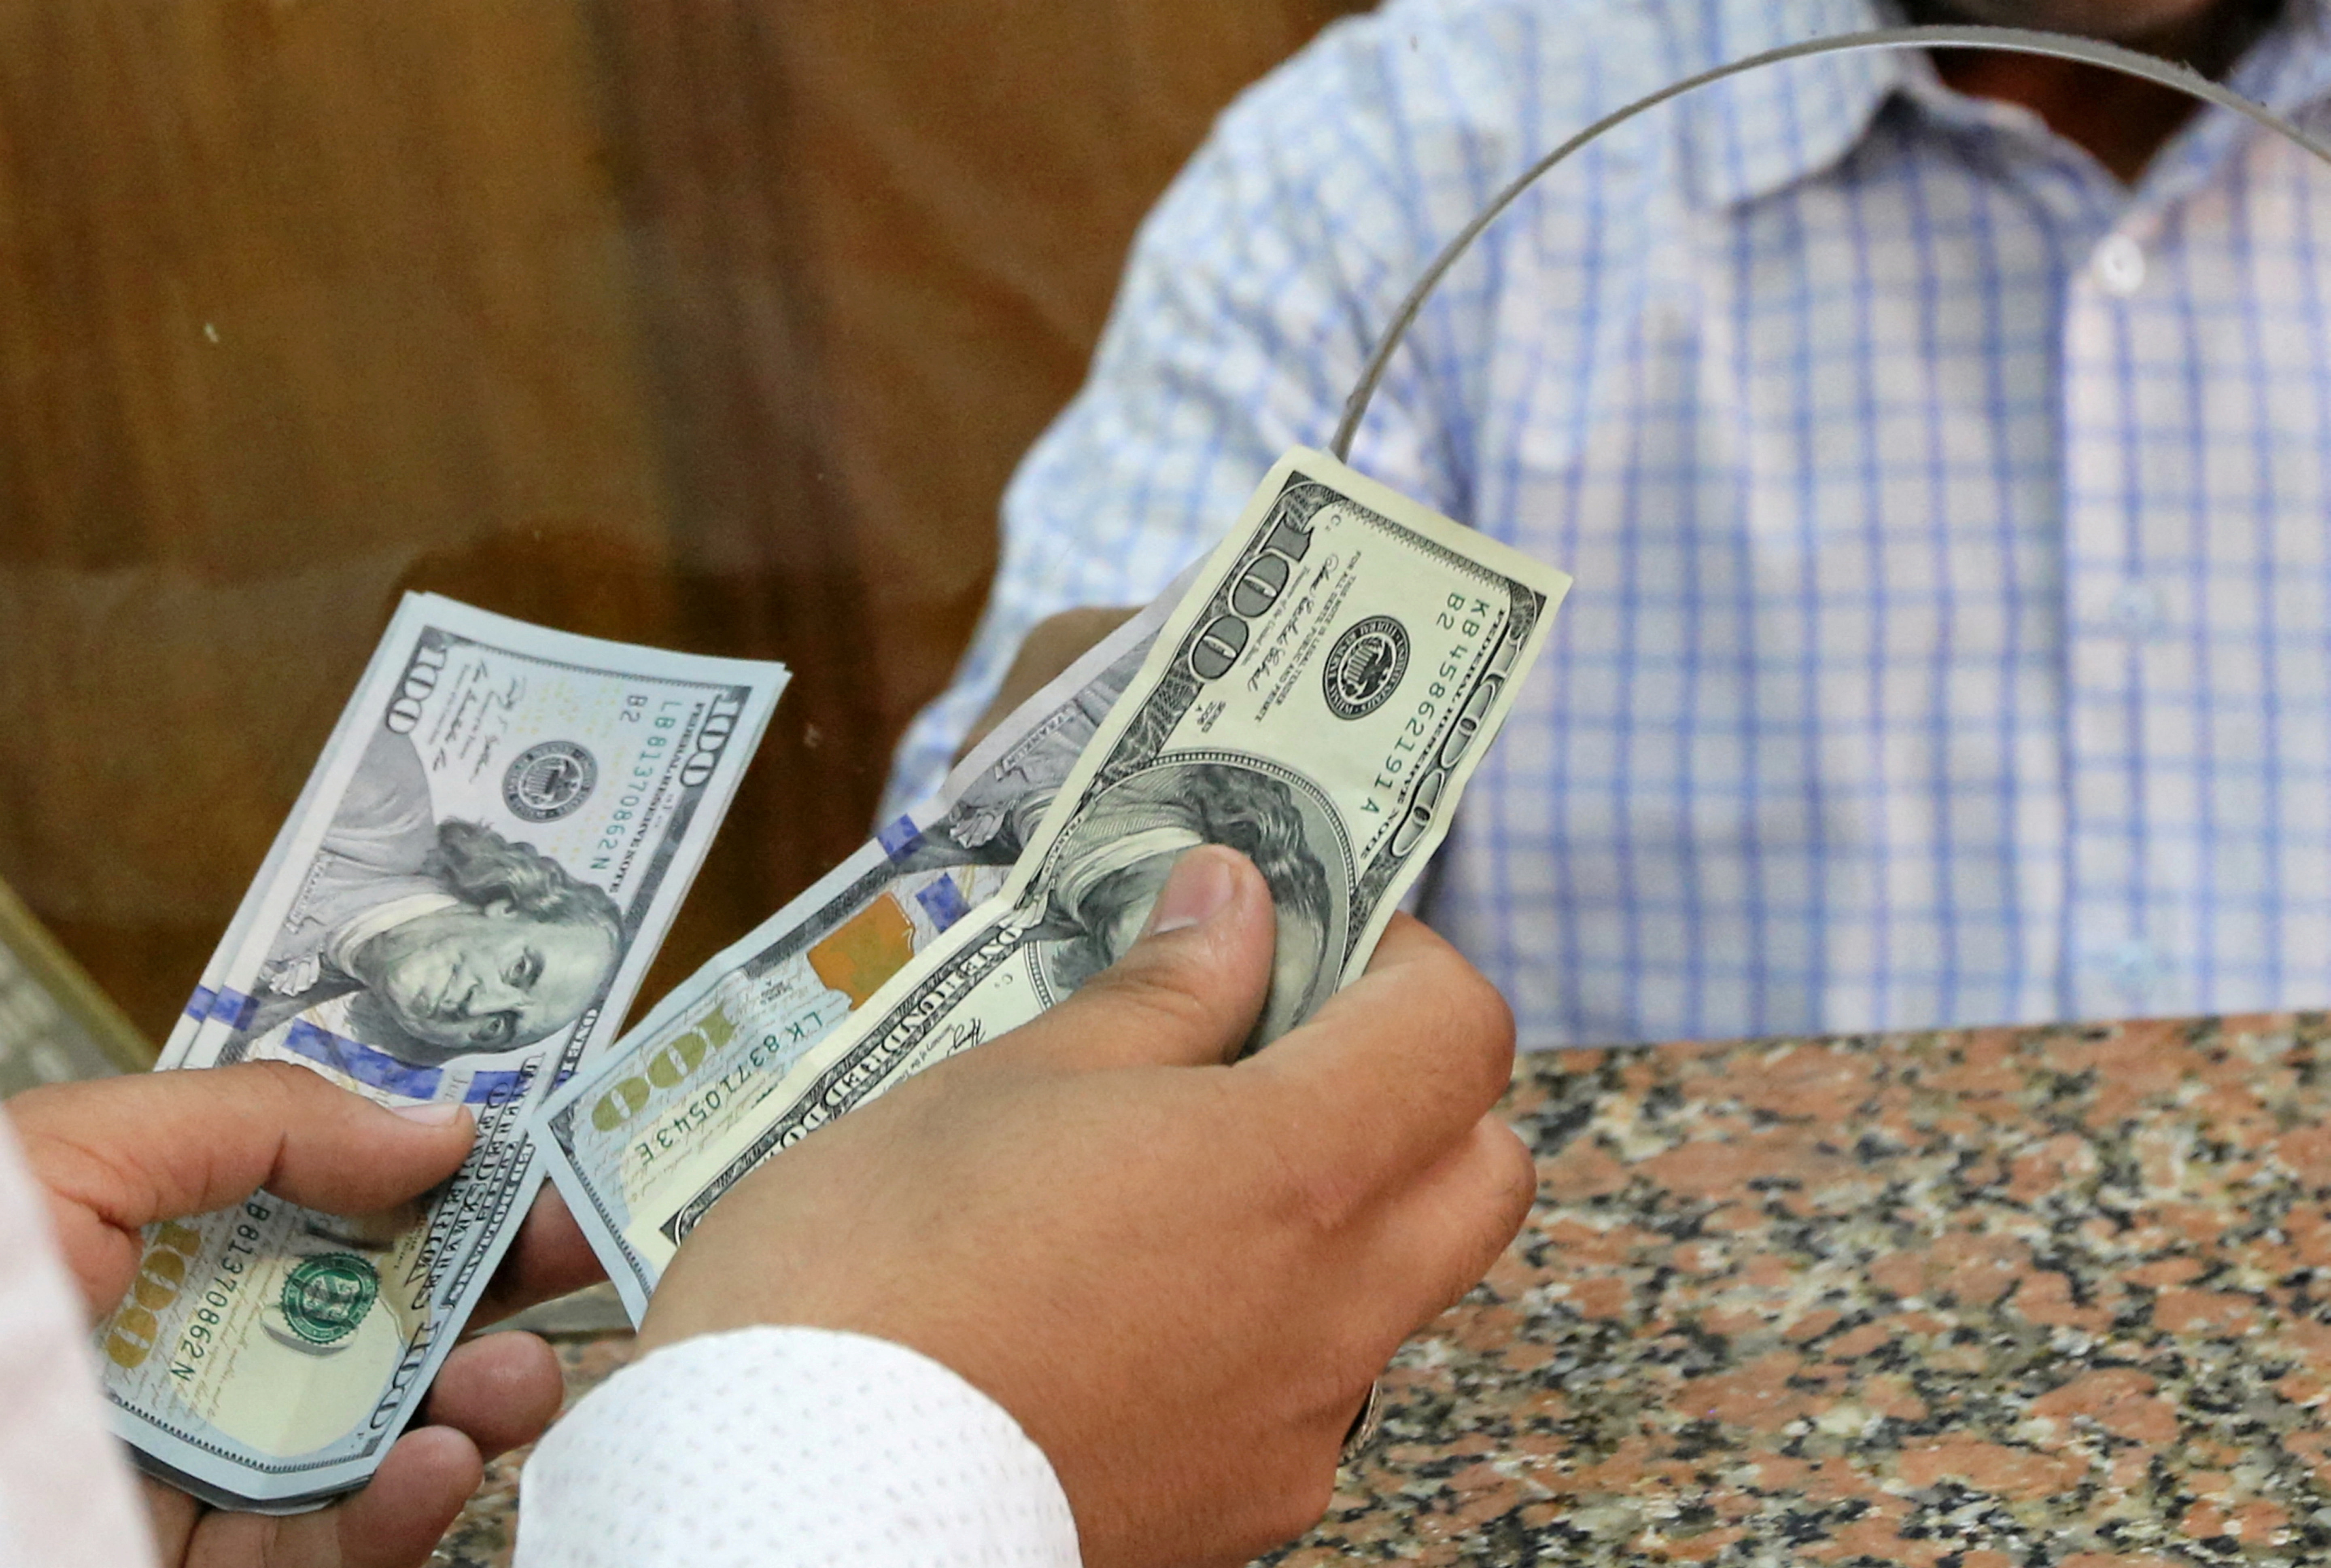 A customer exchanges U.S. dollars to Egyptian pounds in a foreign exchange office in central Cairo, Egypt, November 3, 2016. REUTERS/Mohamed Abd El Ghany/File Photo